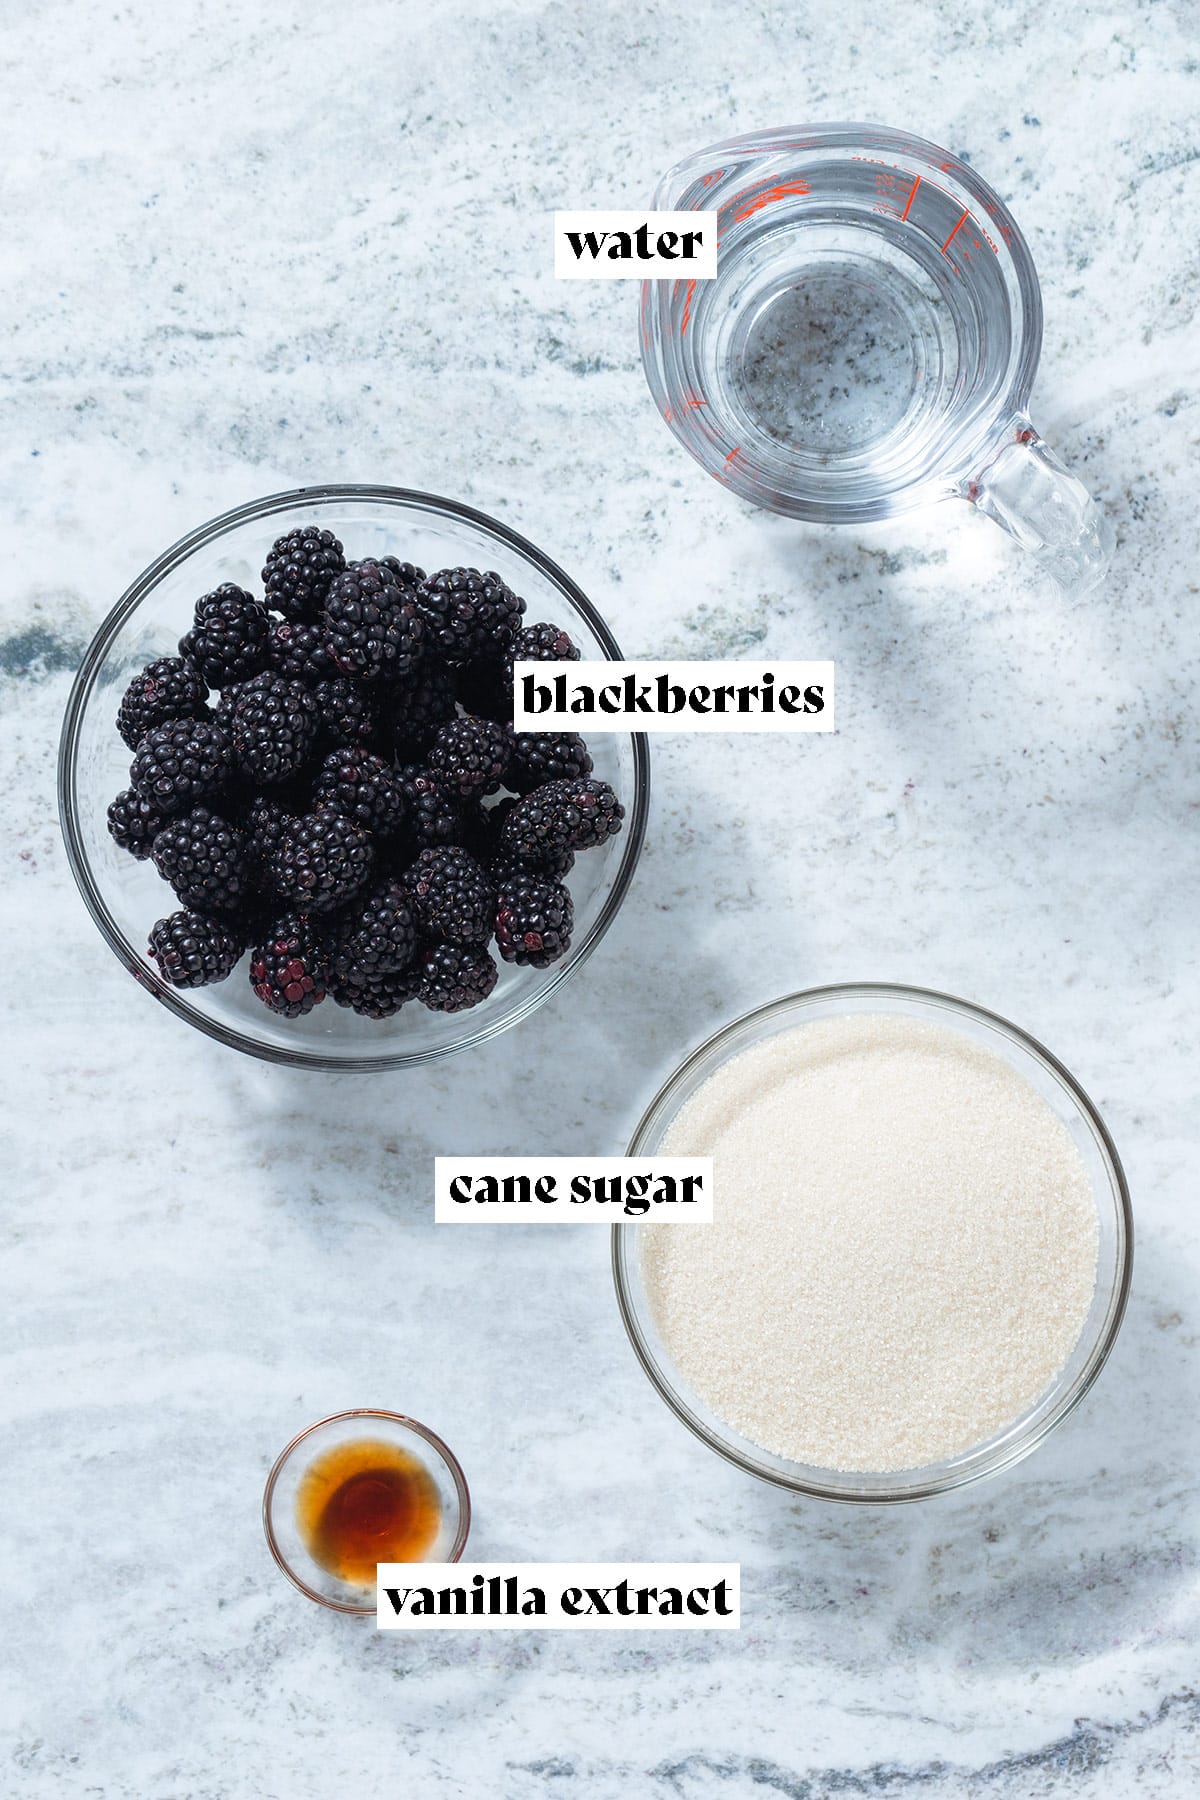 Blackberries, cane sugar, water, and vanilla extract laid out on a grey stone background.